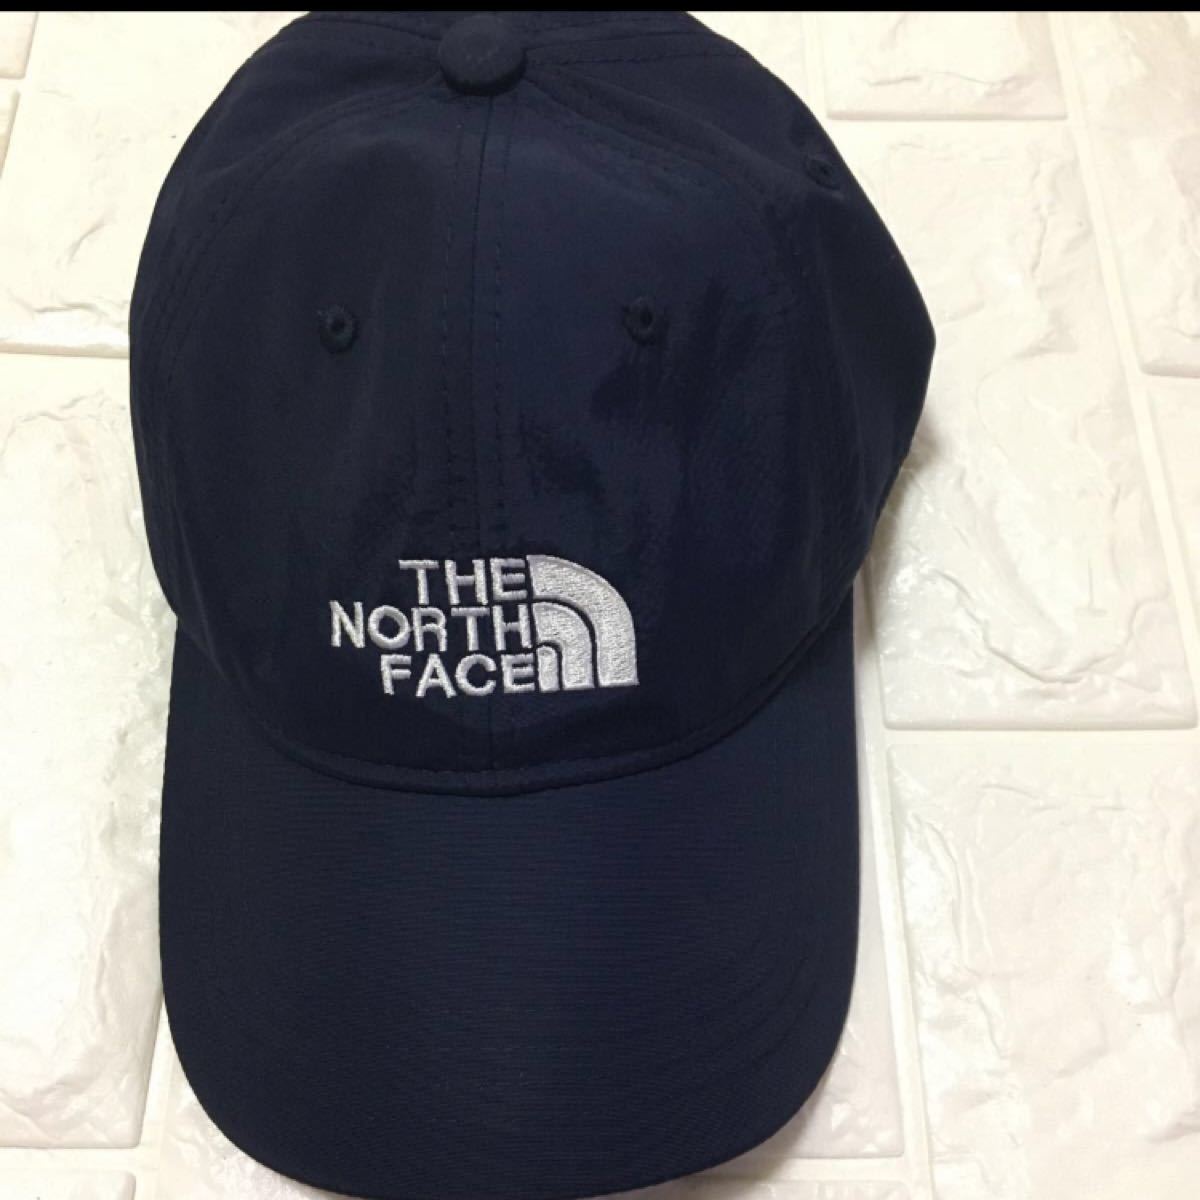 THE NORTH FACE キャップ帽子